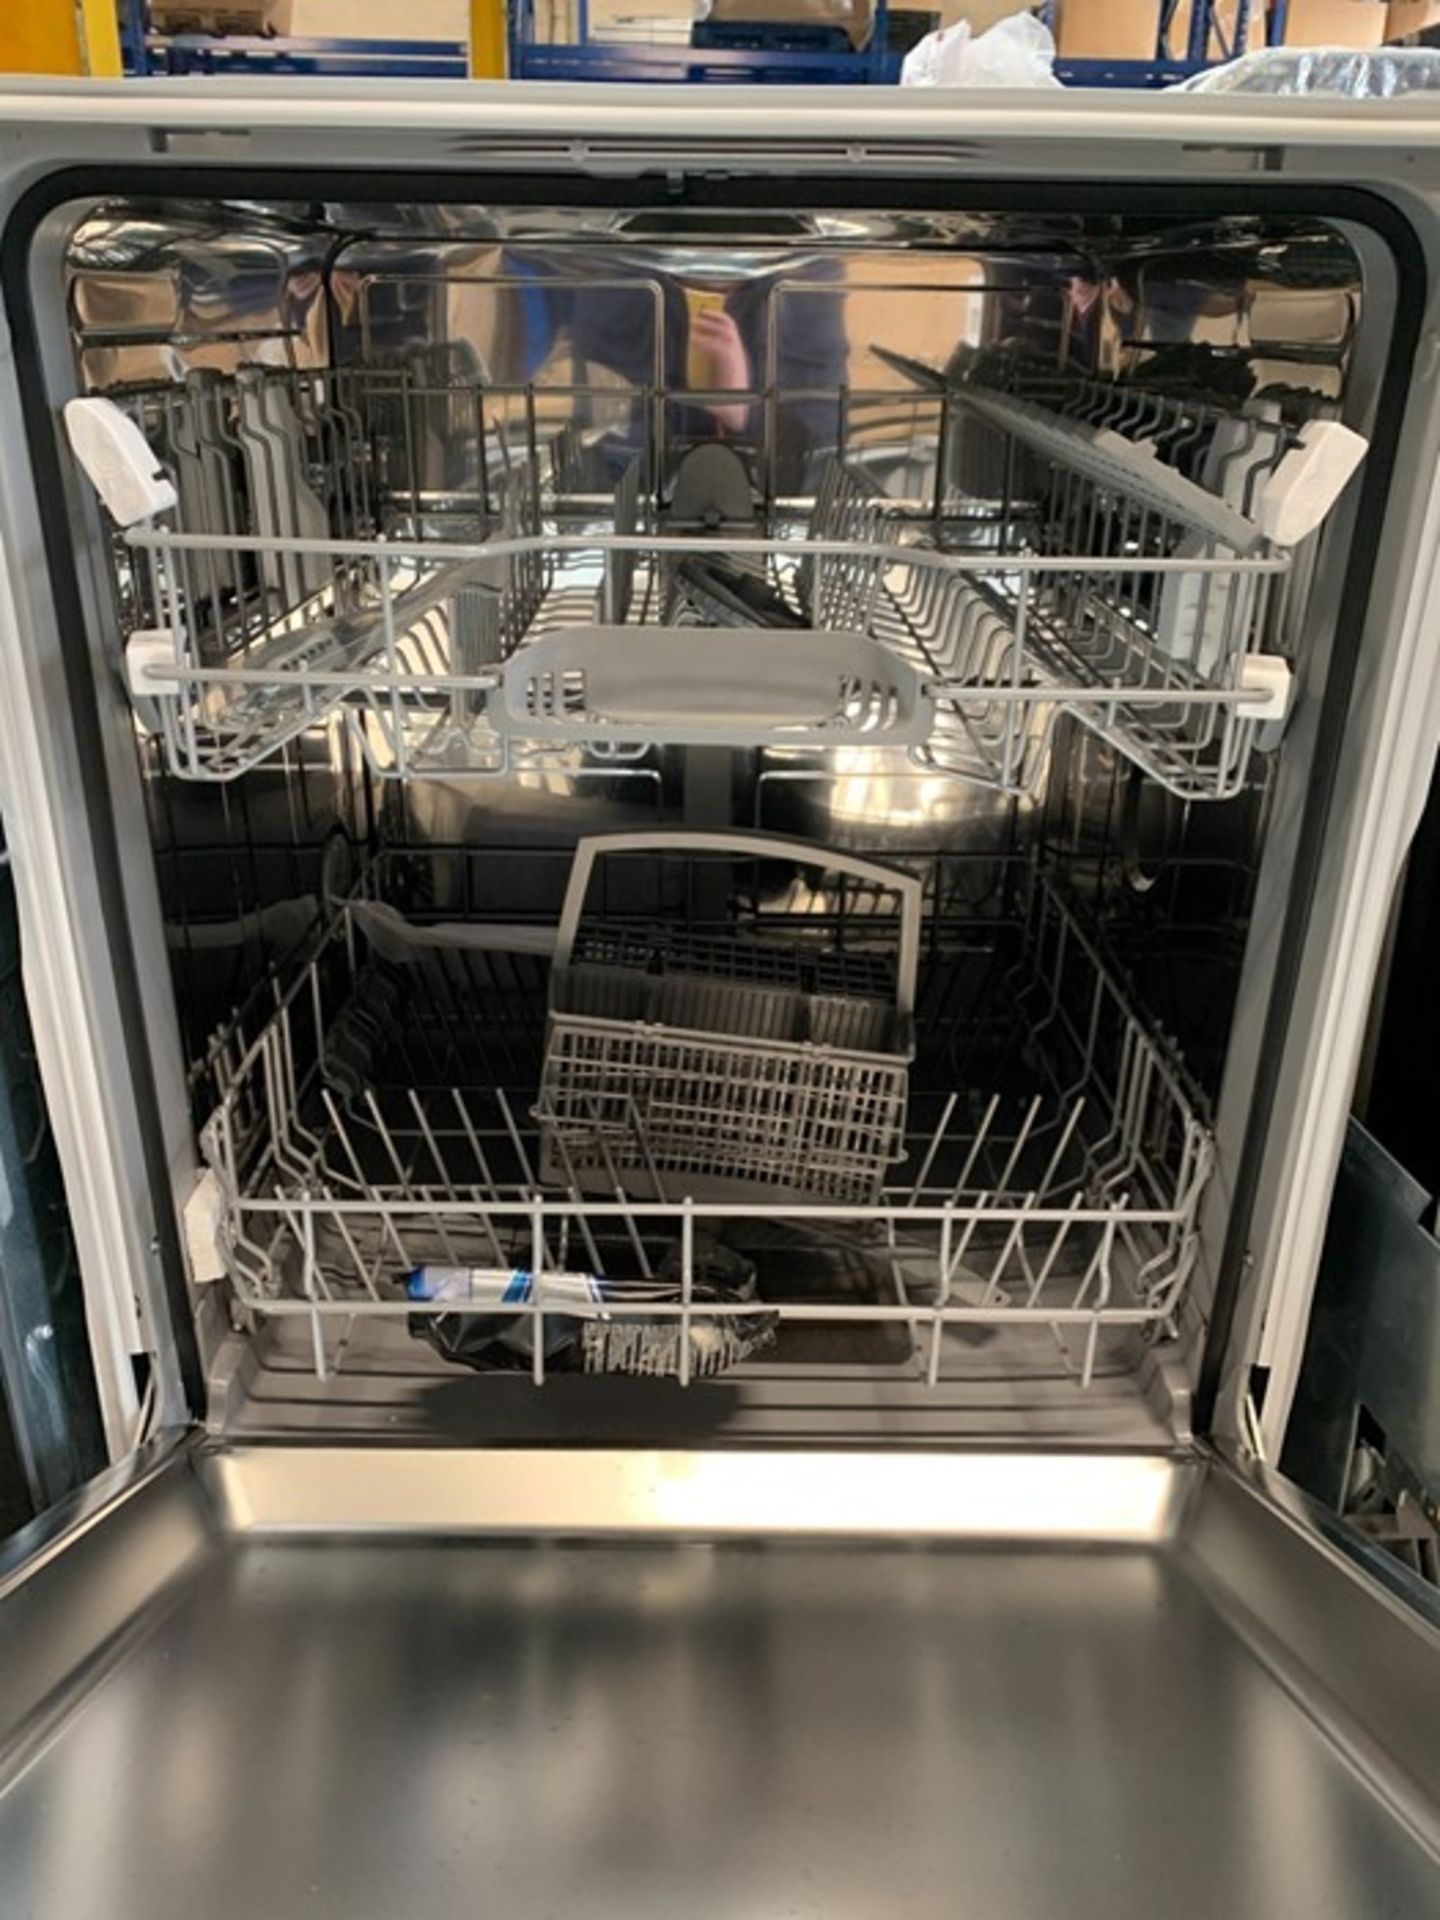 BOSCH SMV40C30GB FULLY INTEGRATED DISHWASHER - Image 2 of 2